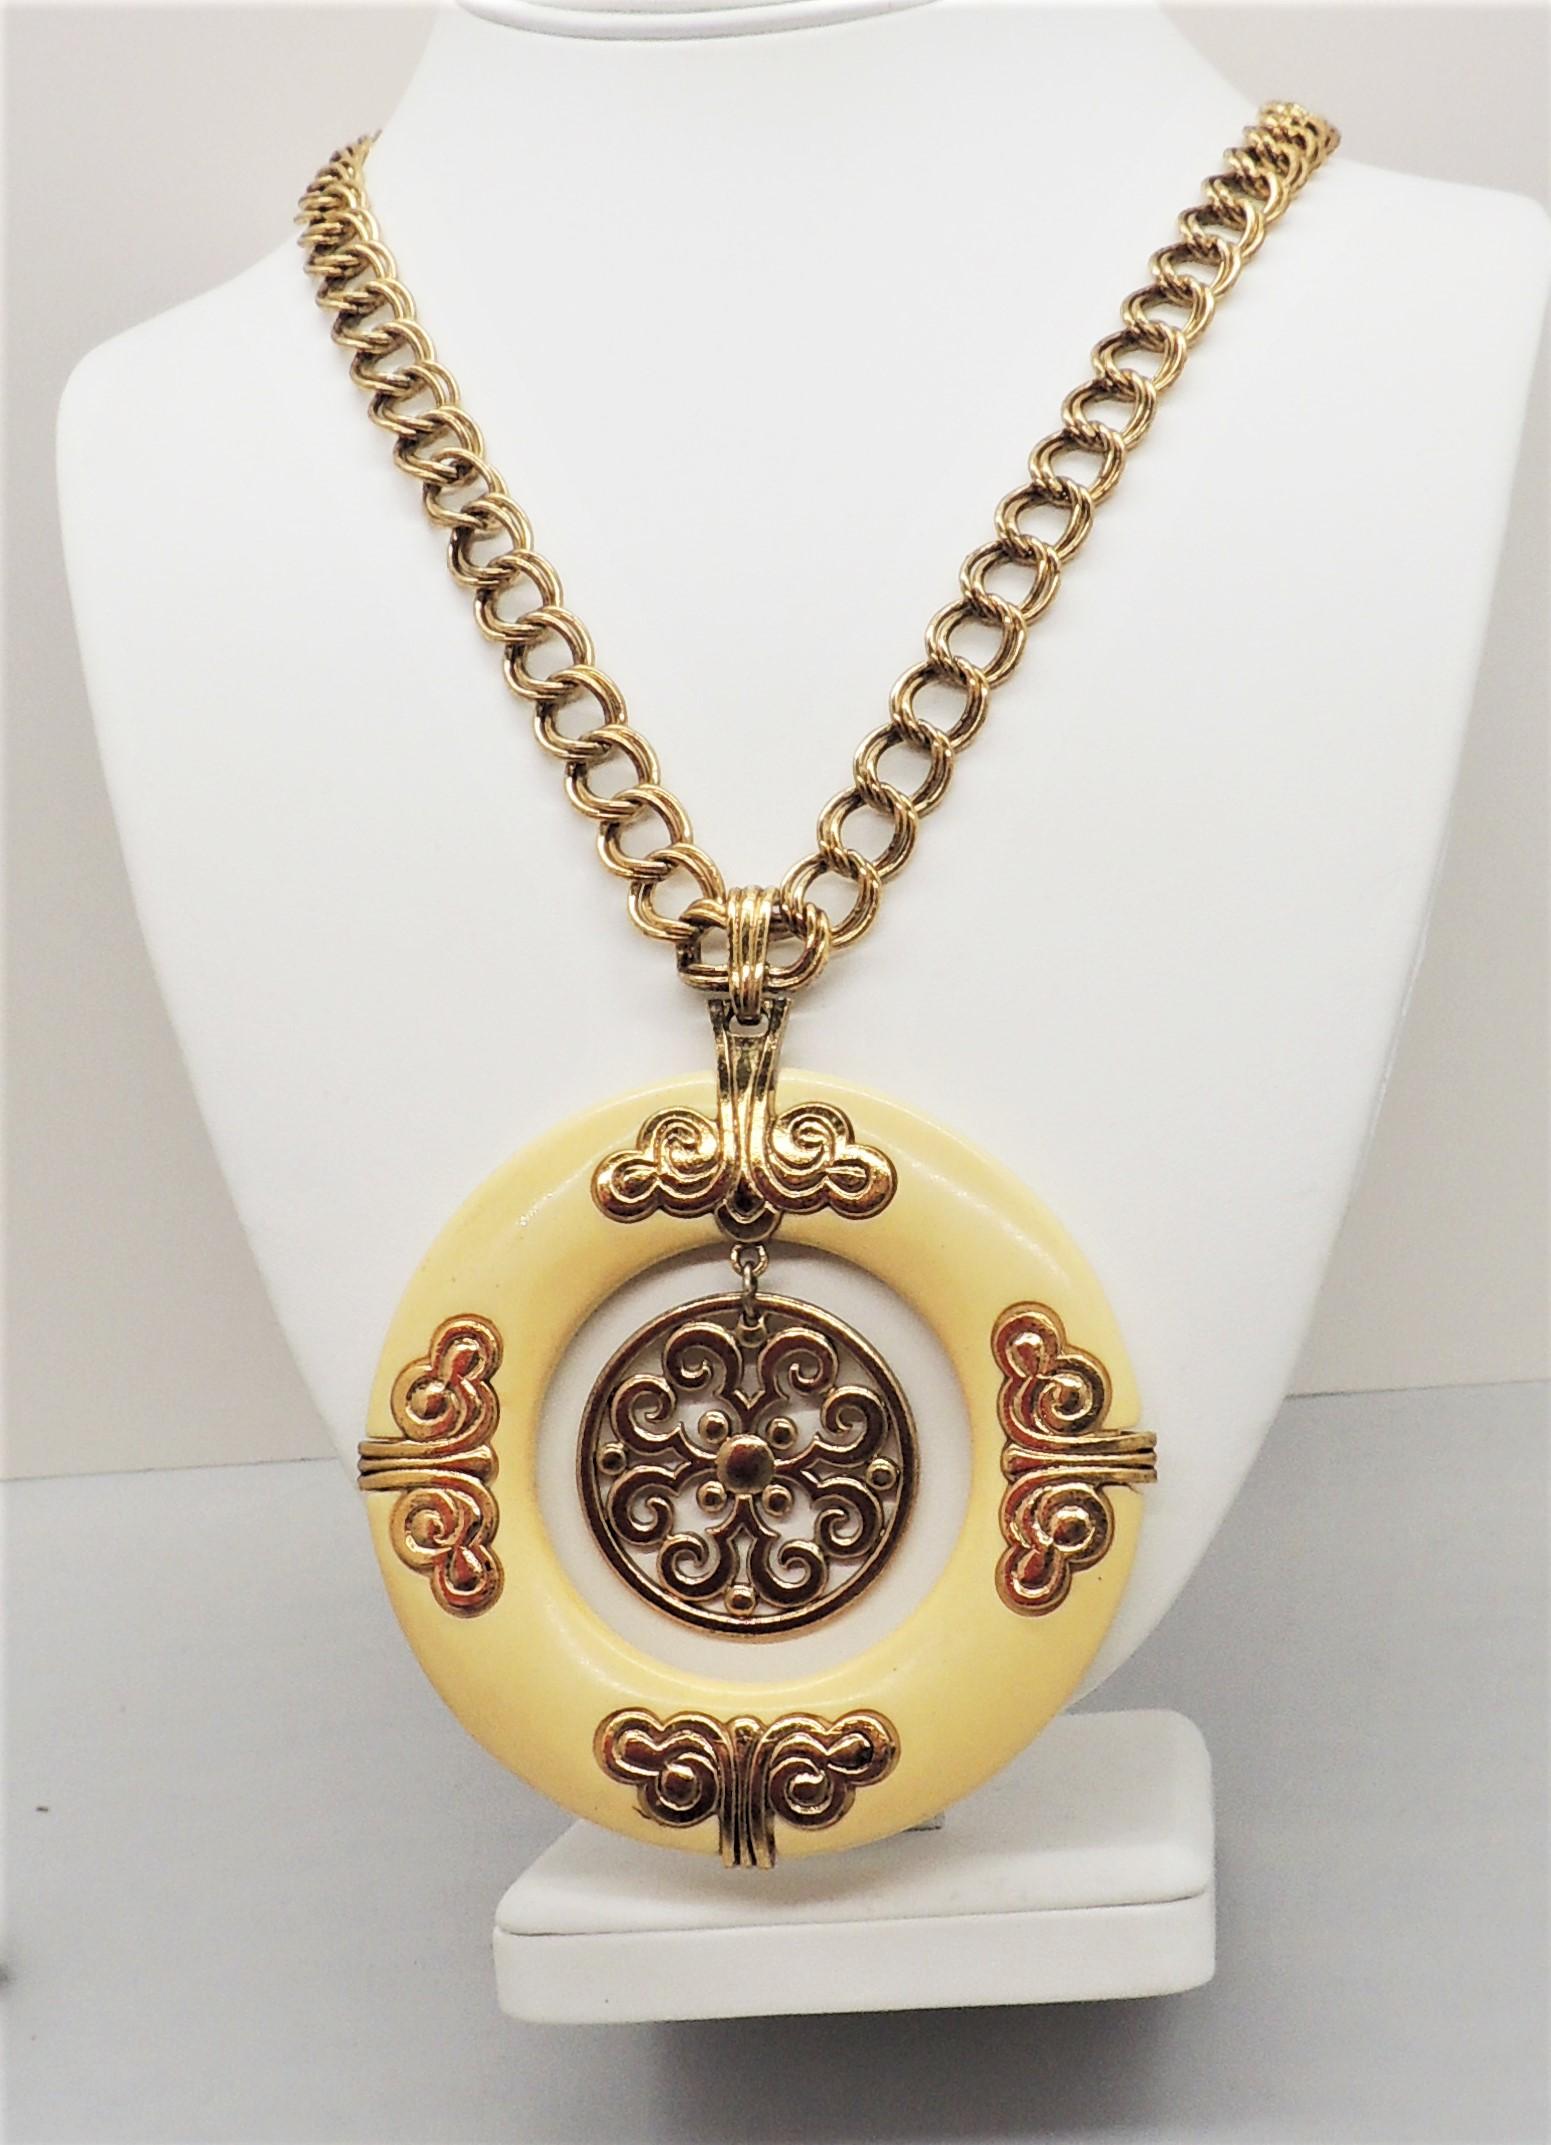 Vintage Signed Crown Trifari Asian Style White Pendant Necklace, 1972 Ad Piece In Good Condition For Sale In Easton, PA